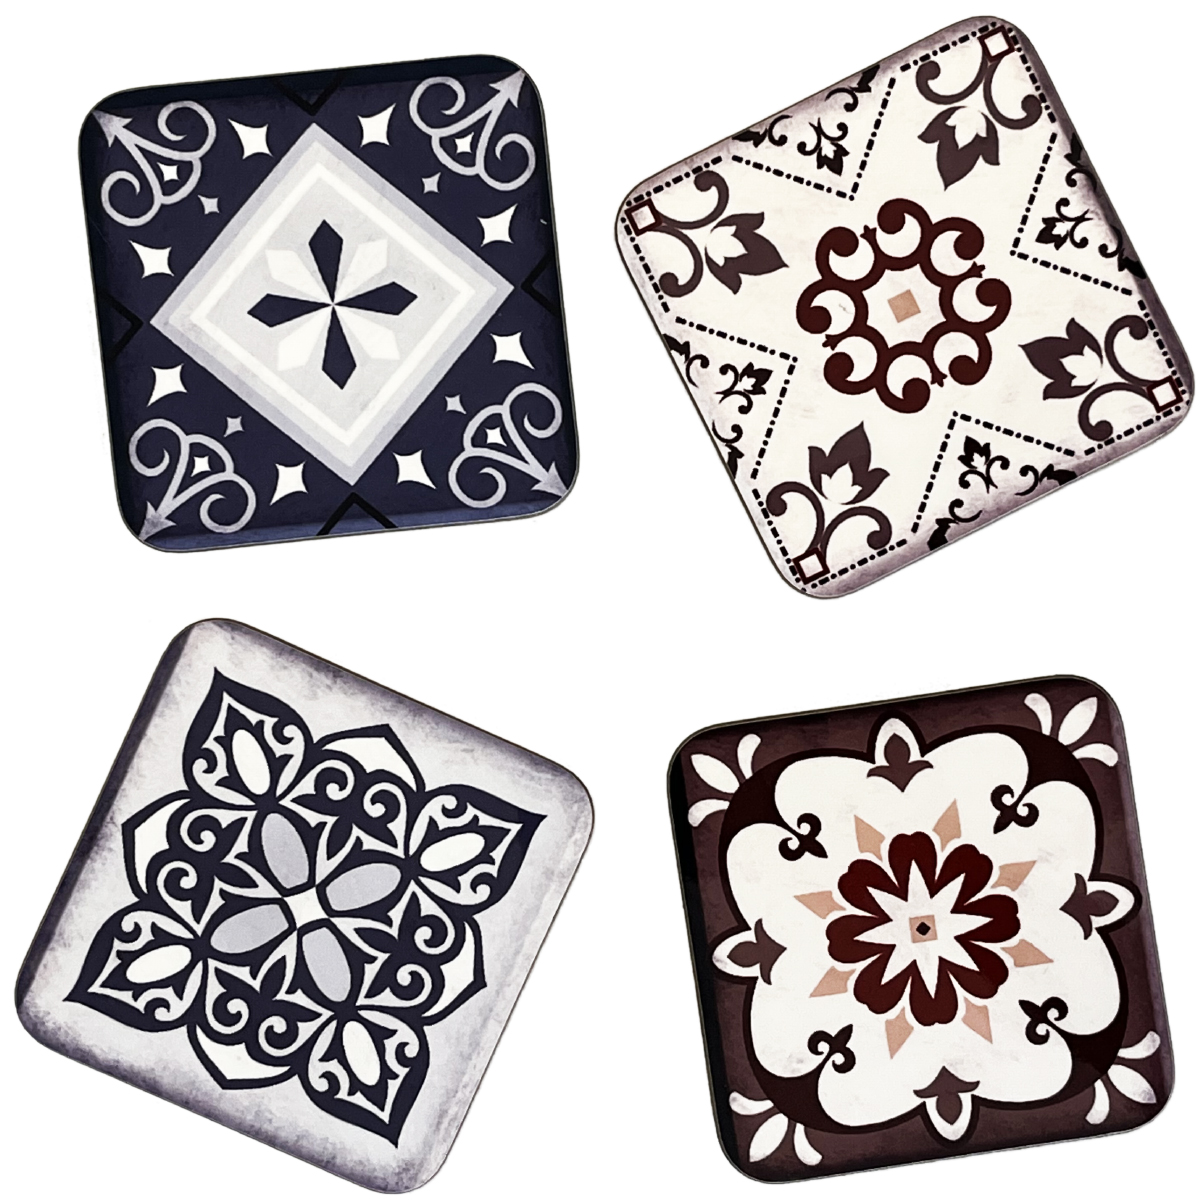 4 coasters Set by Cbkreation